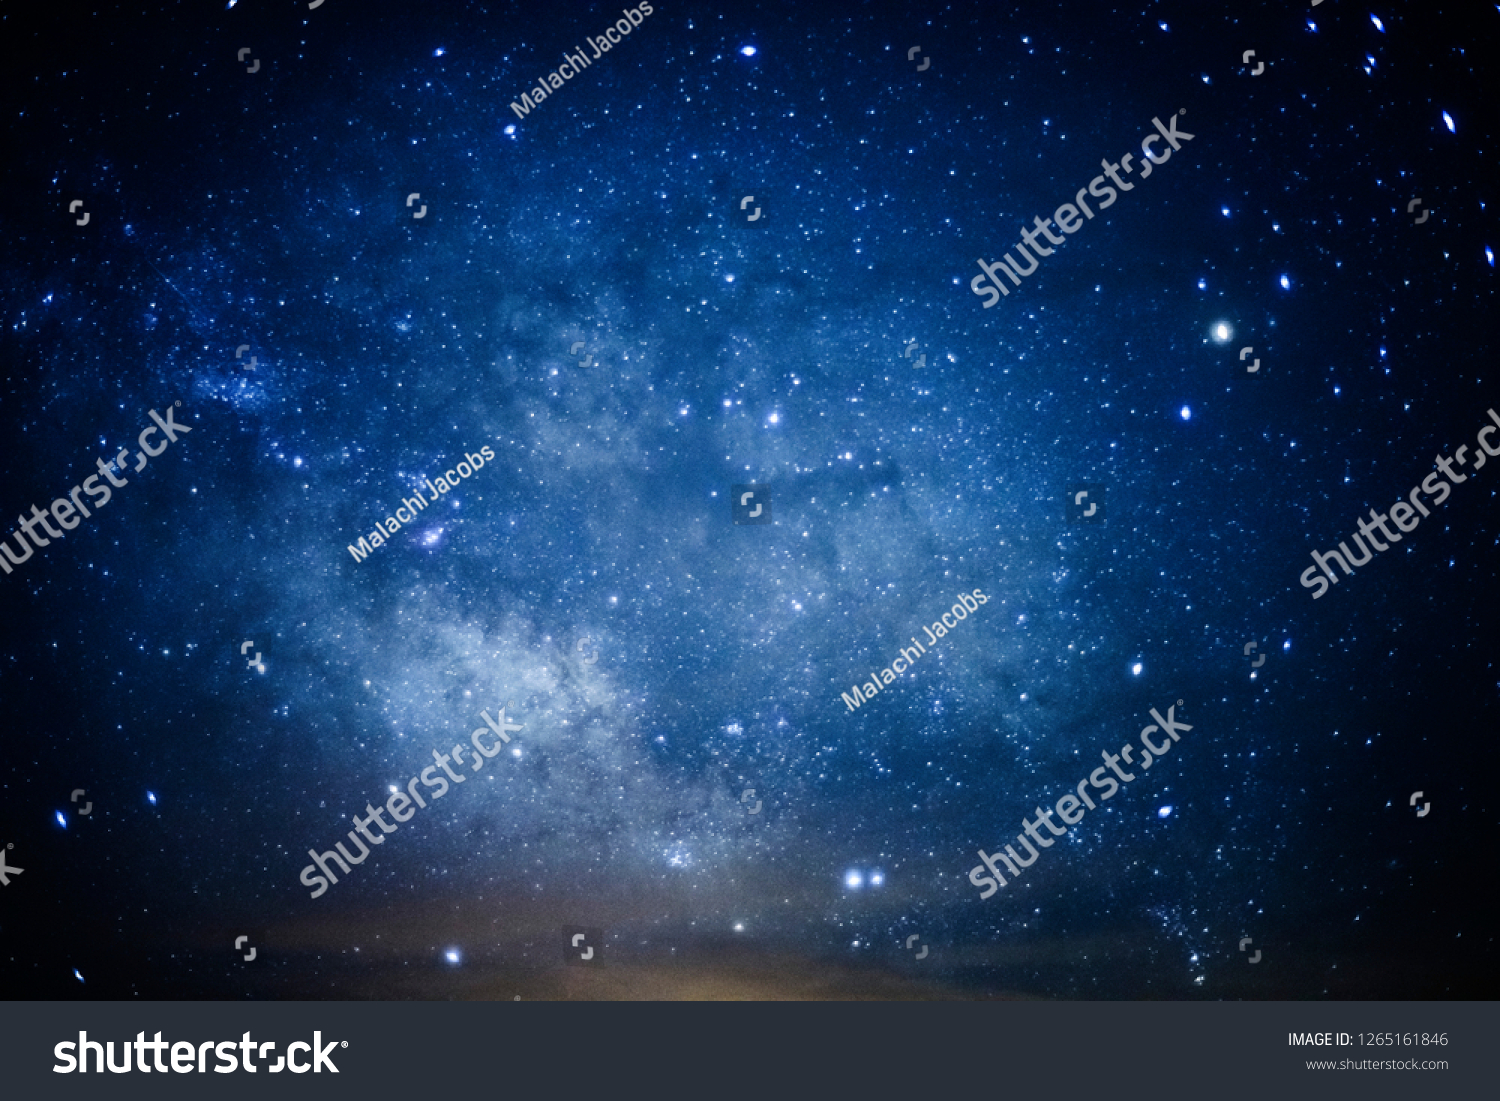 Constellation Scorpius and the Milky Way #1265161846